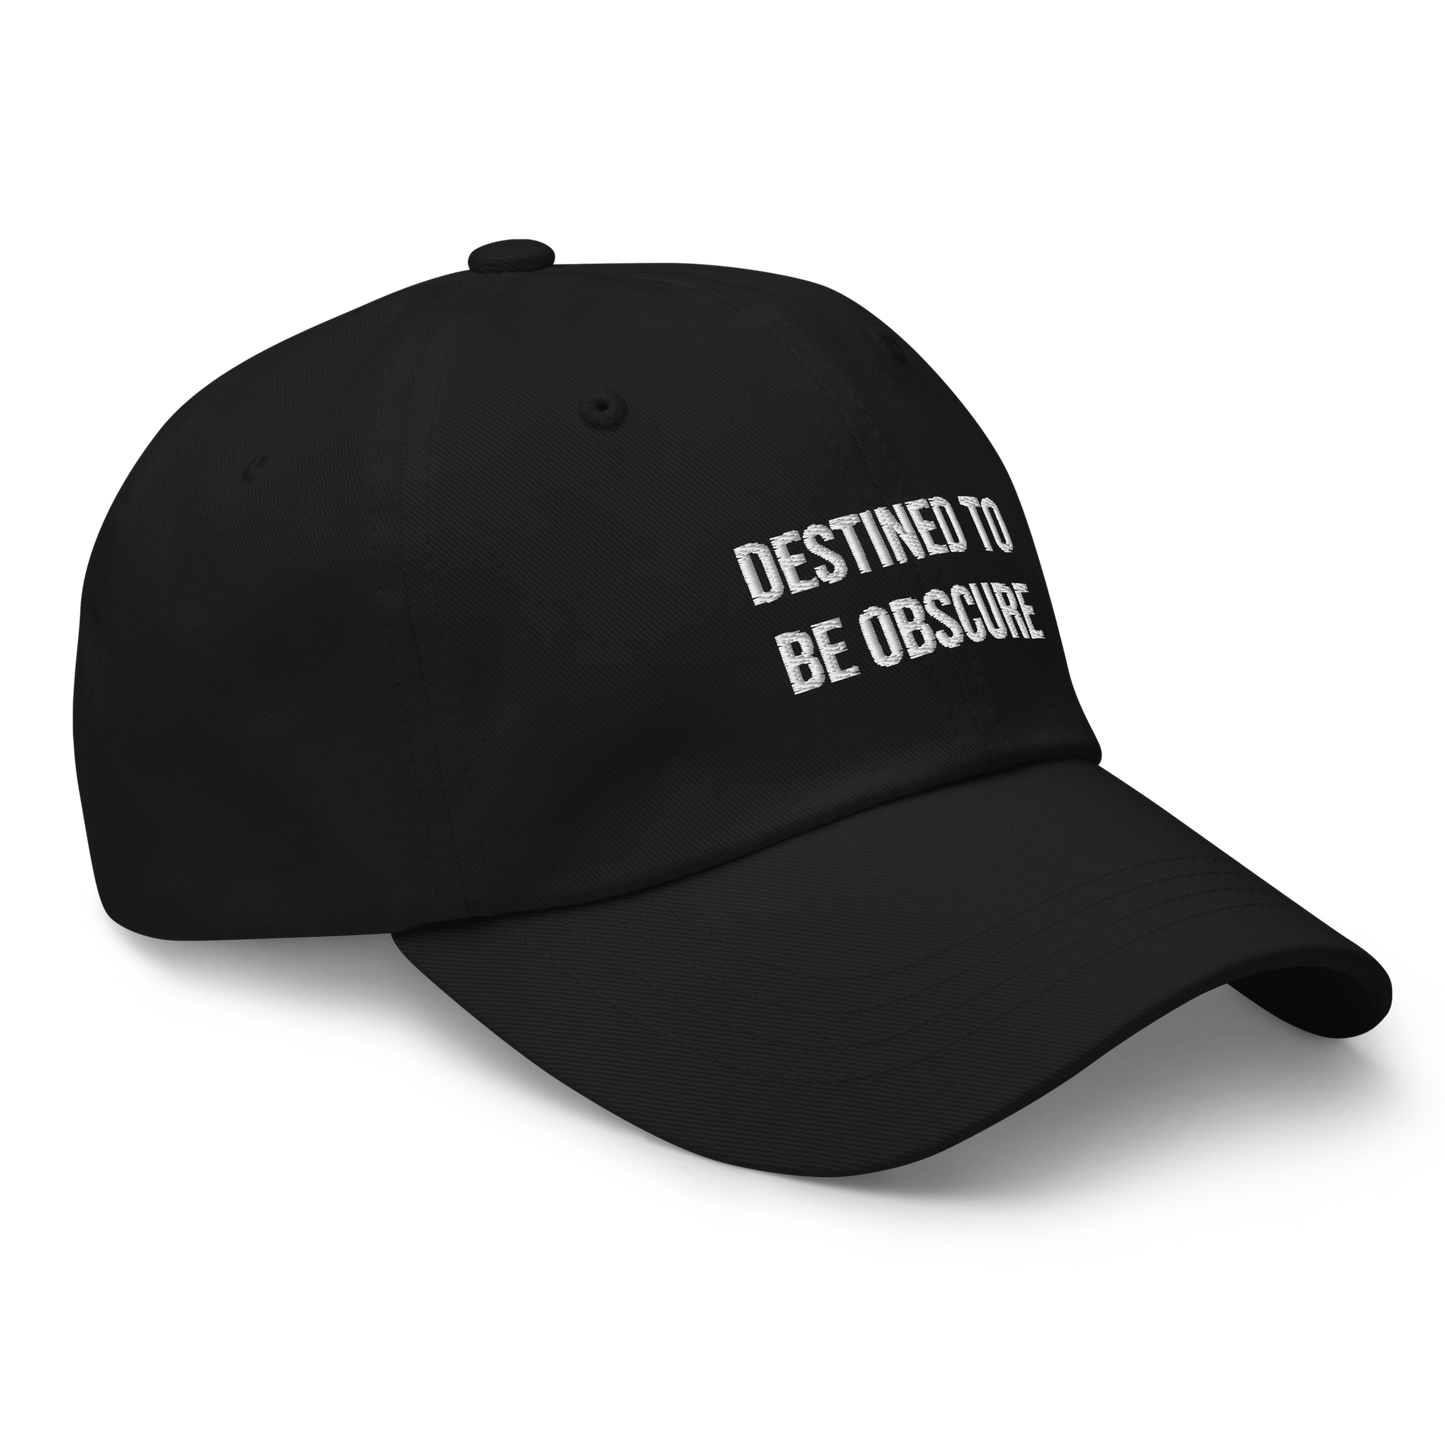 Dad Hat "DESTINED TO BE OBSCURE"